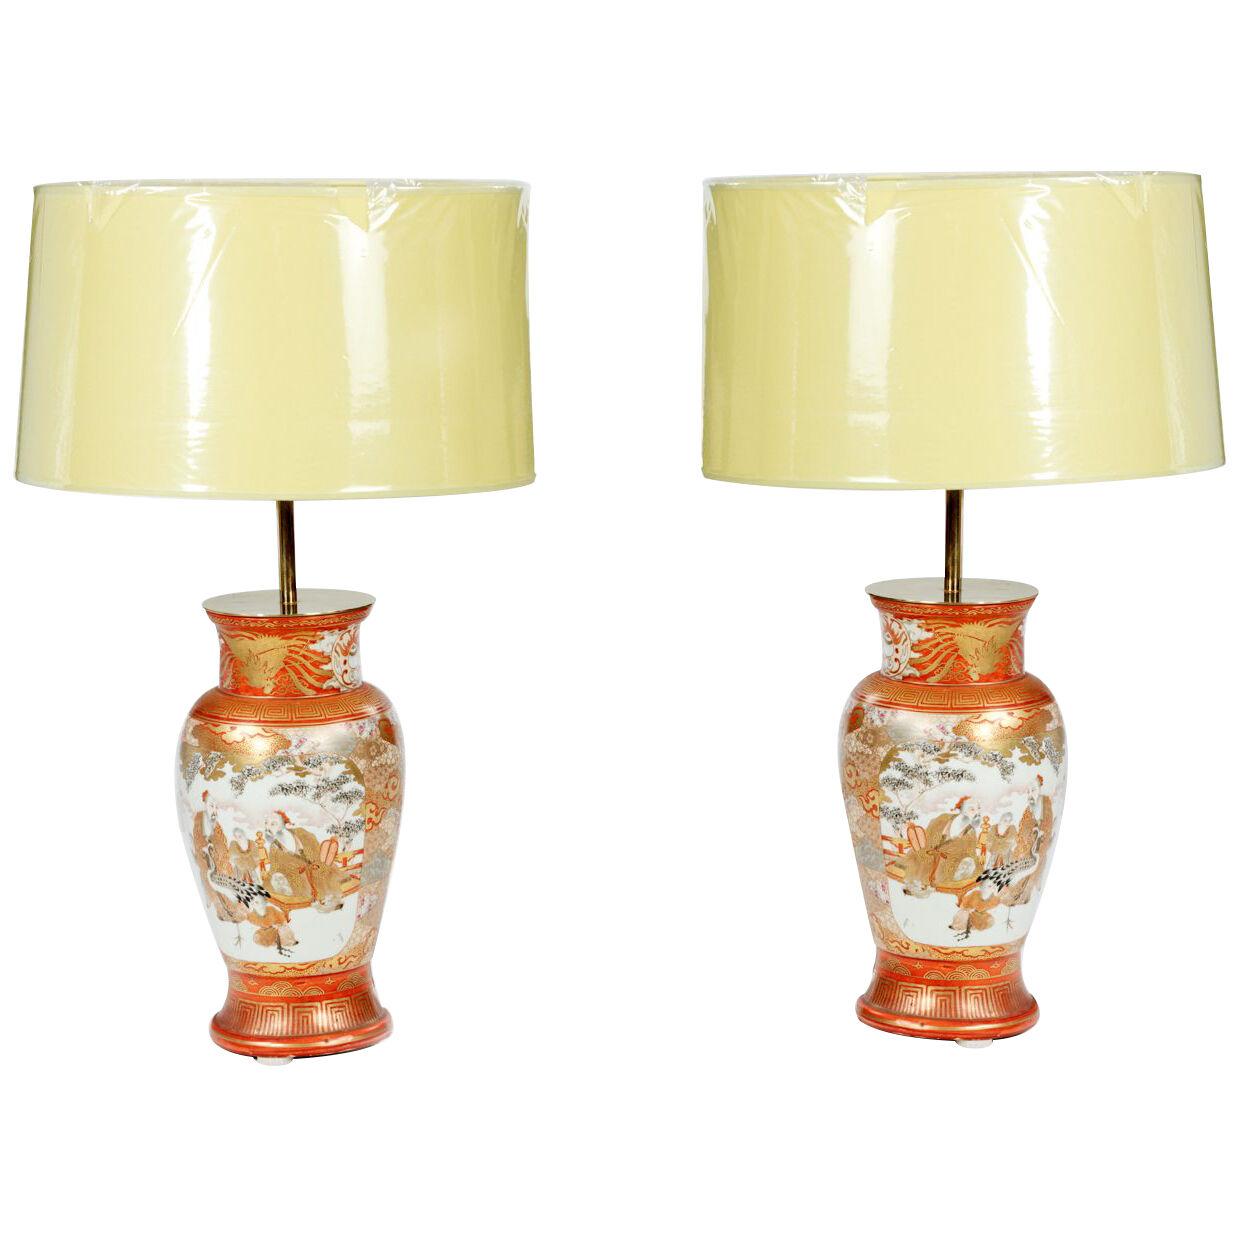 Pair of Antique Japanese Vases Converted into Table Lamps